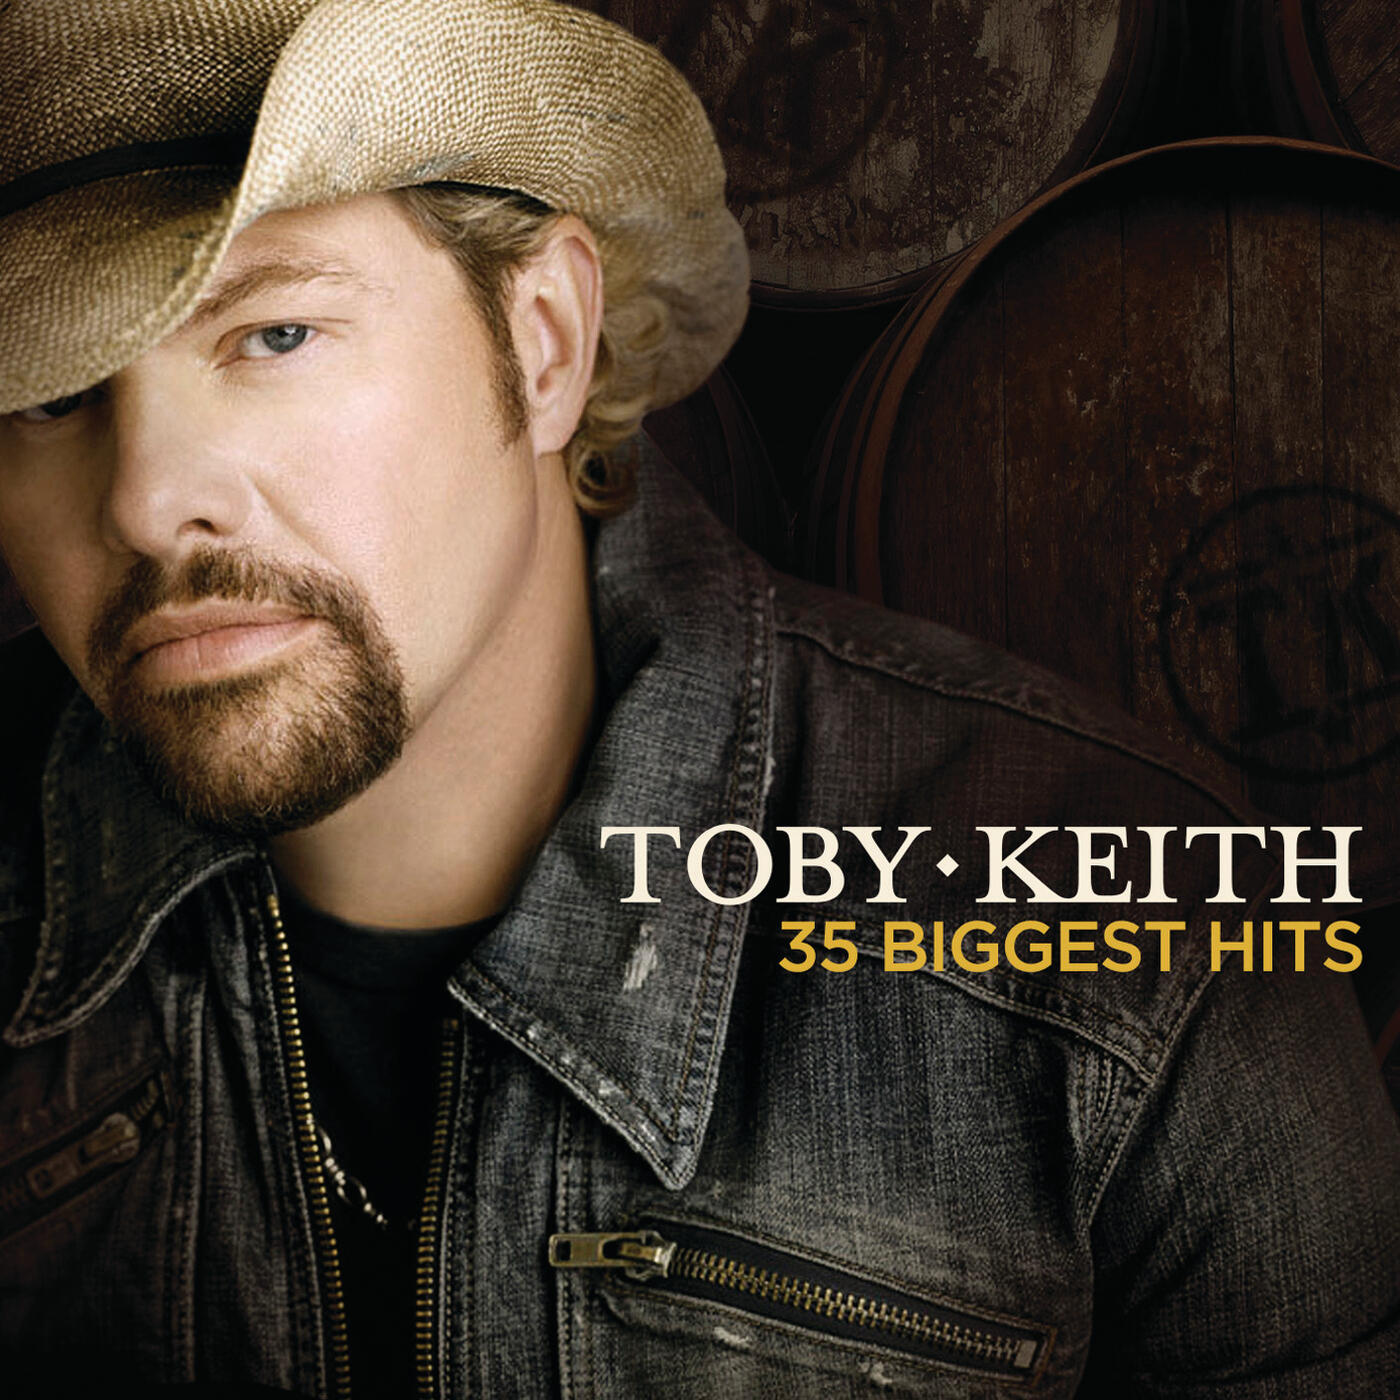 Keith, Toby - Toby Keith: Greatest Hits 2 -  Music